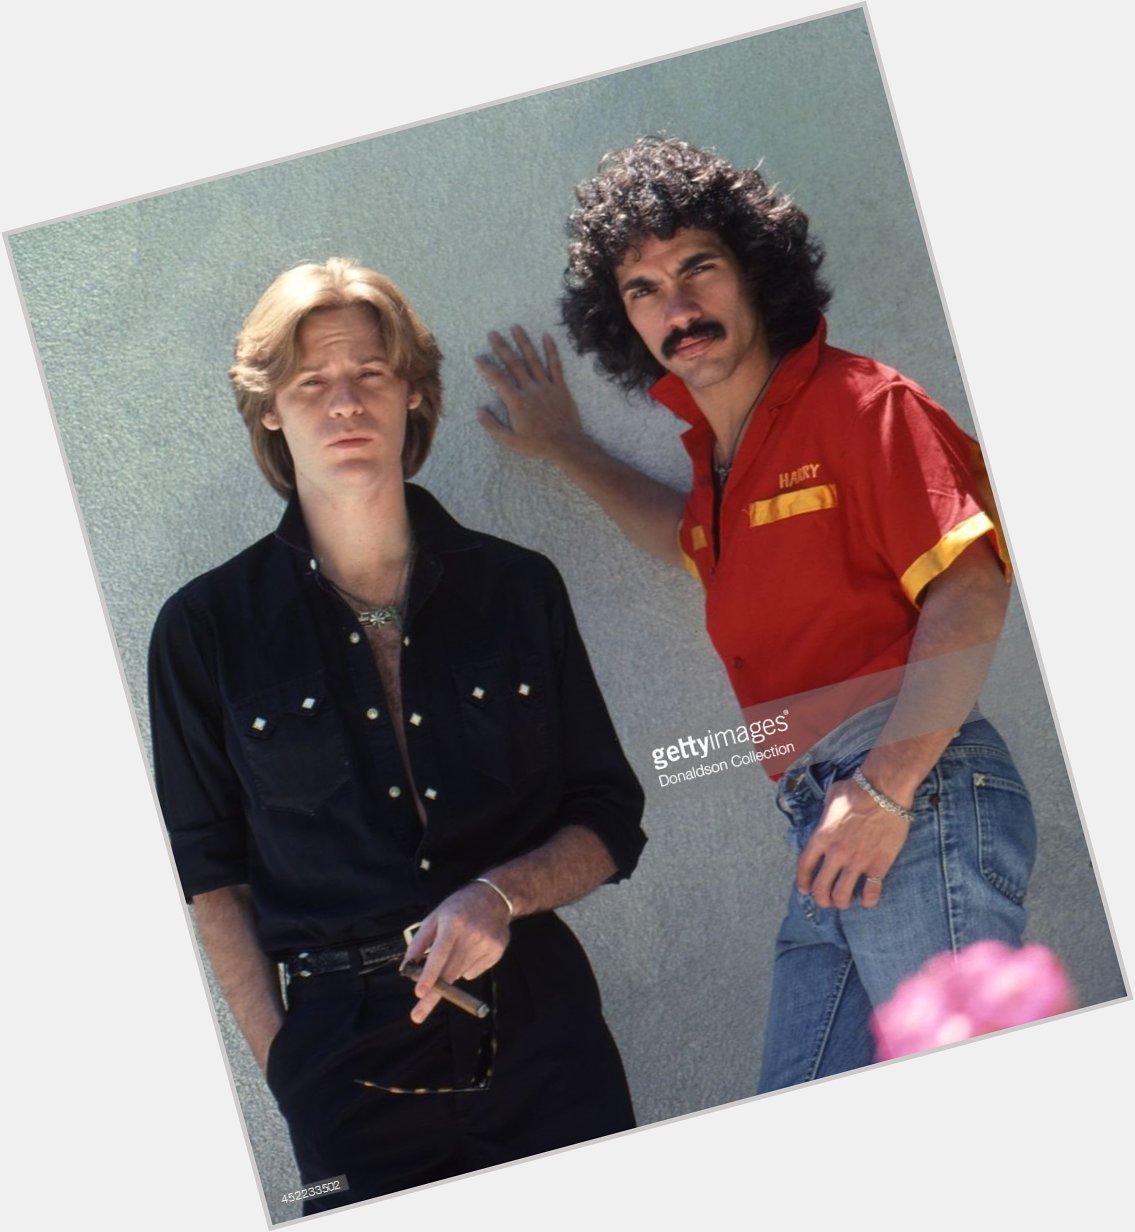 Happy Birthday to Daryl Hall(left) who turns 71 today! 